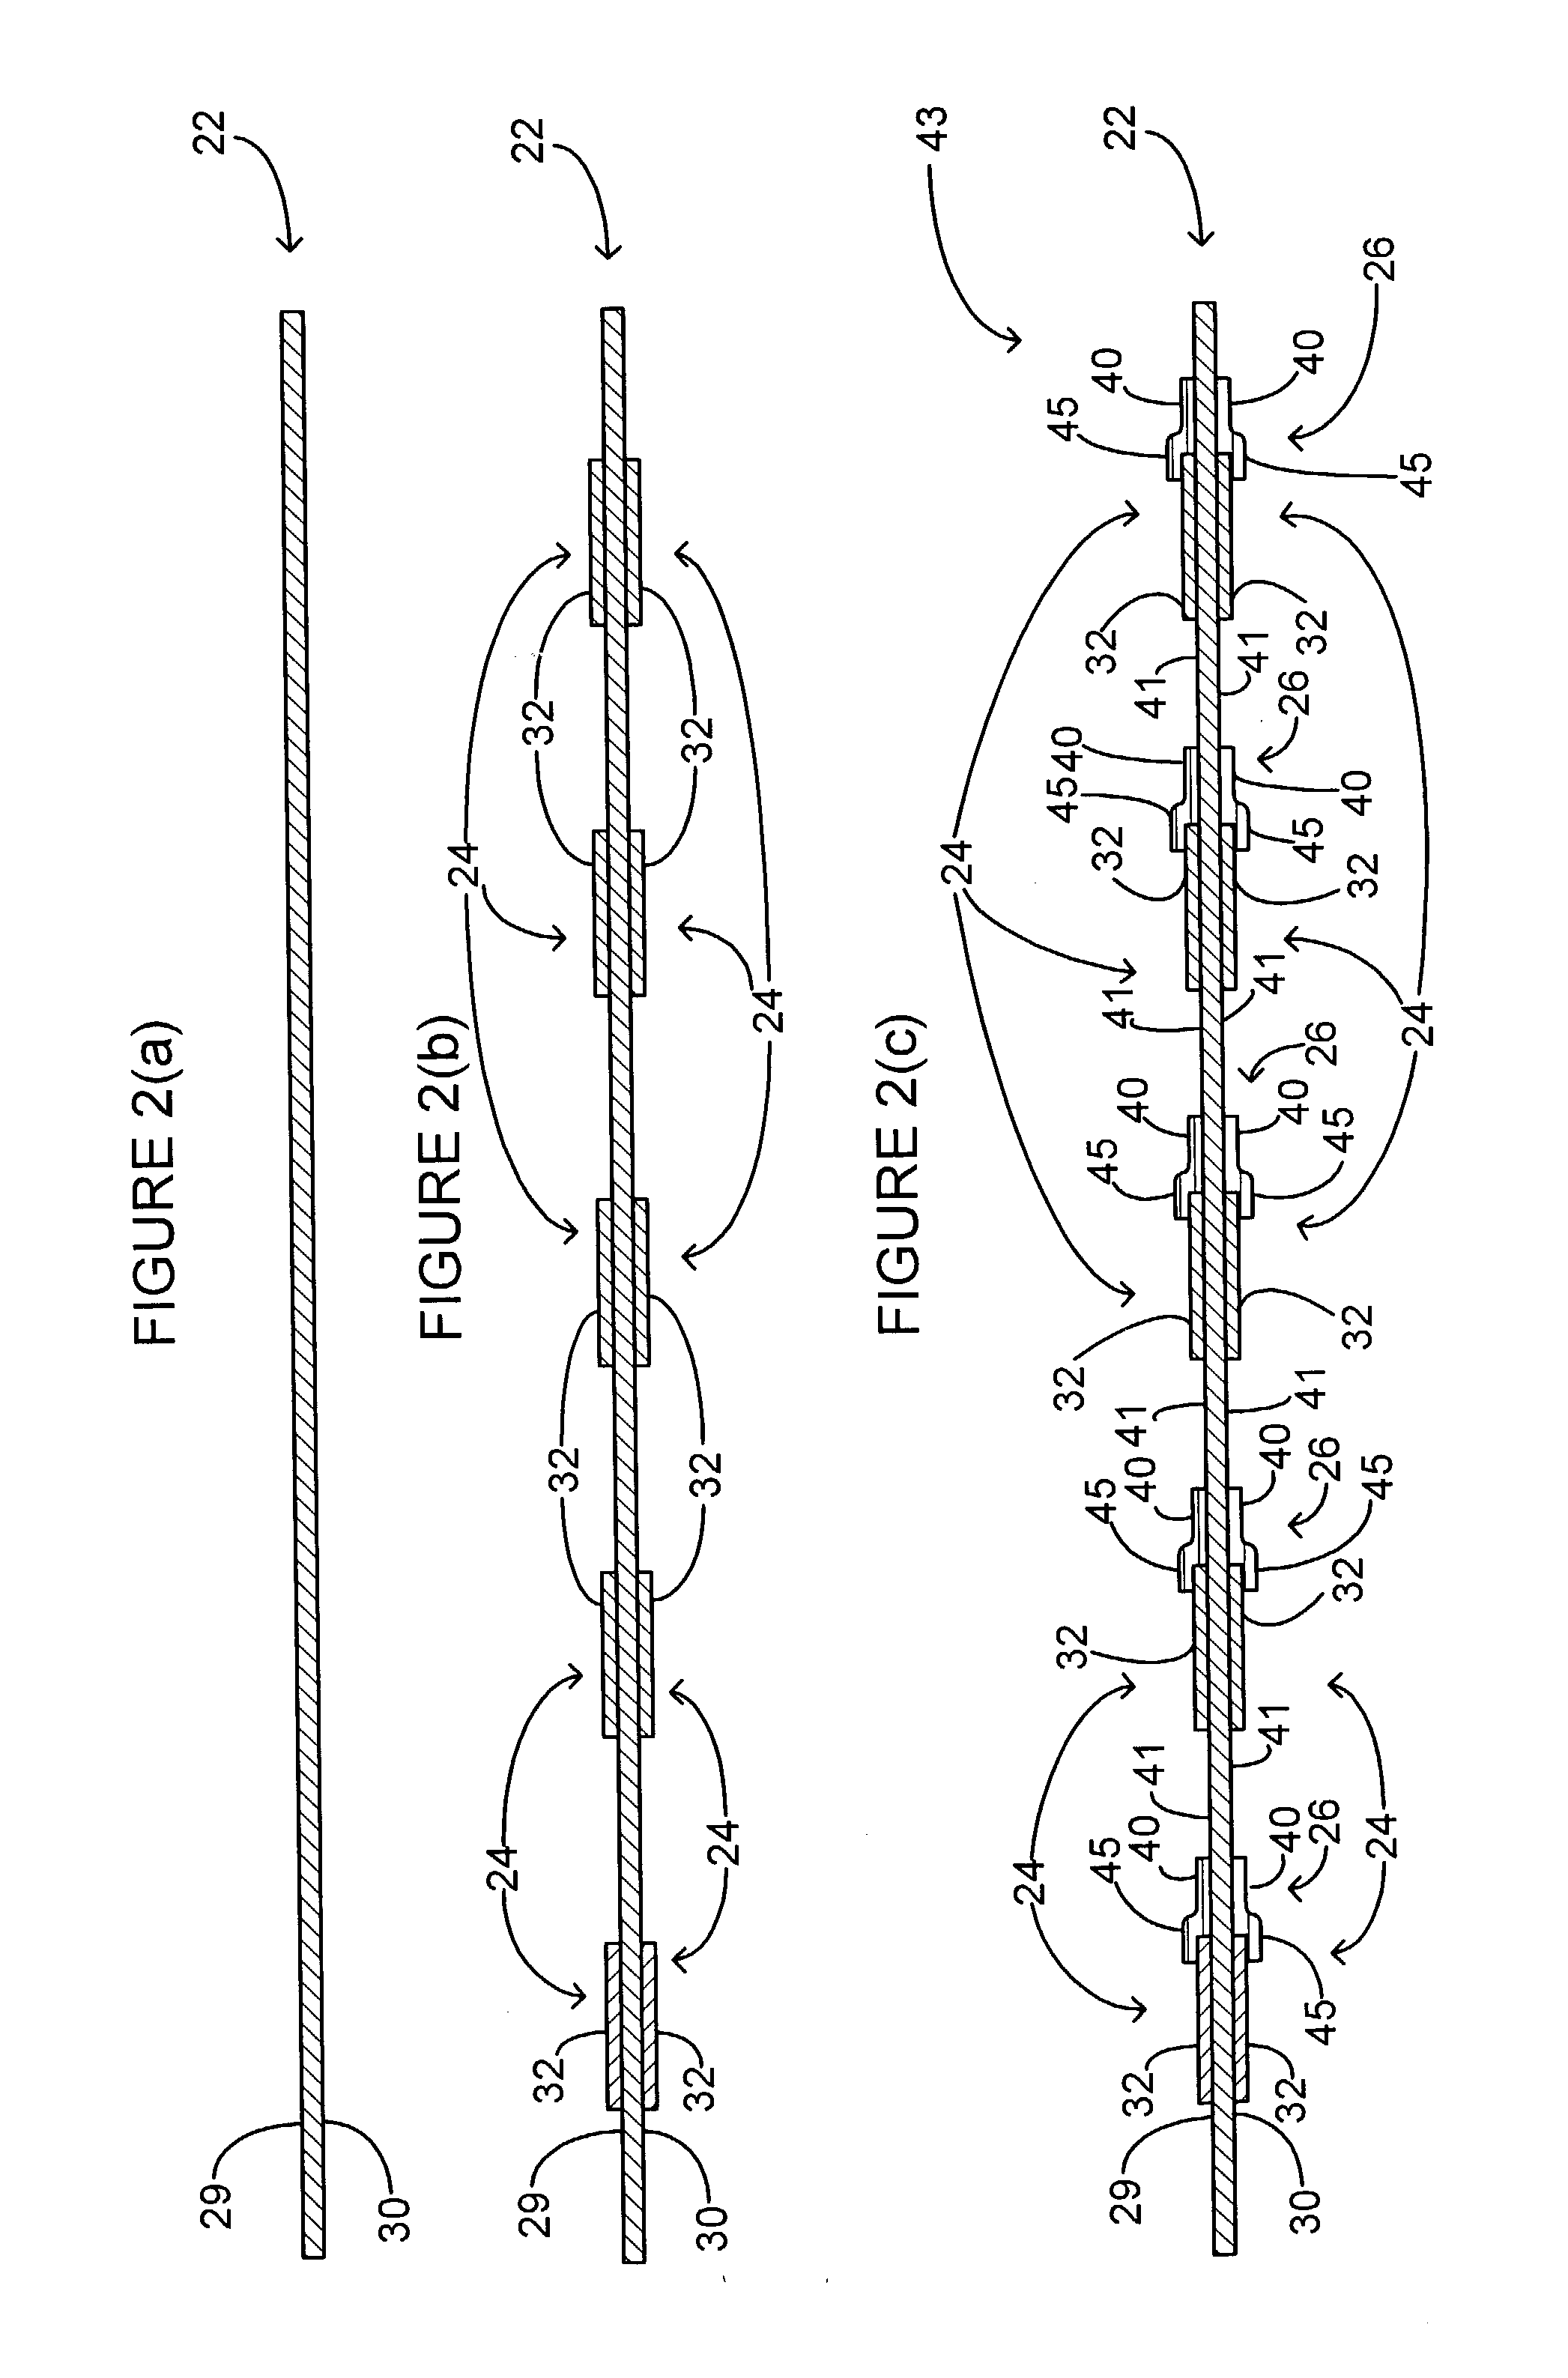 Method of fabricating fuel cells and membrane electrode assemblies